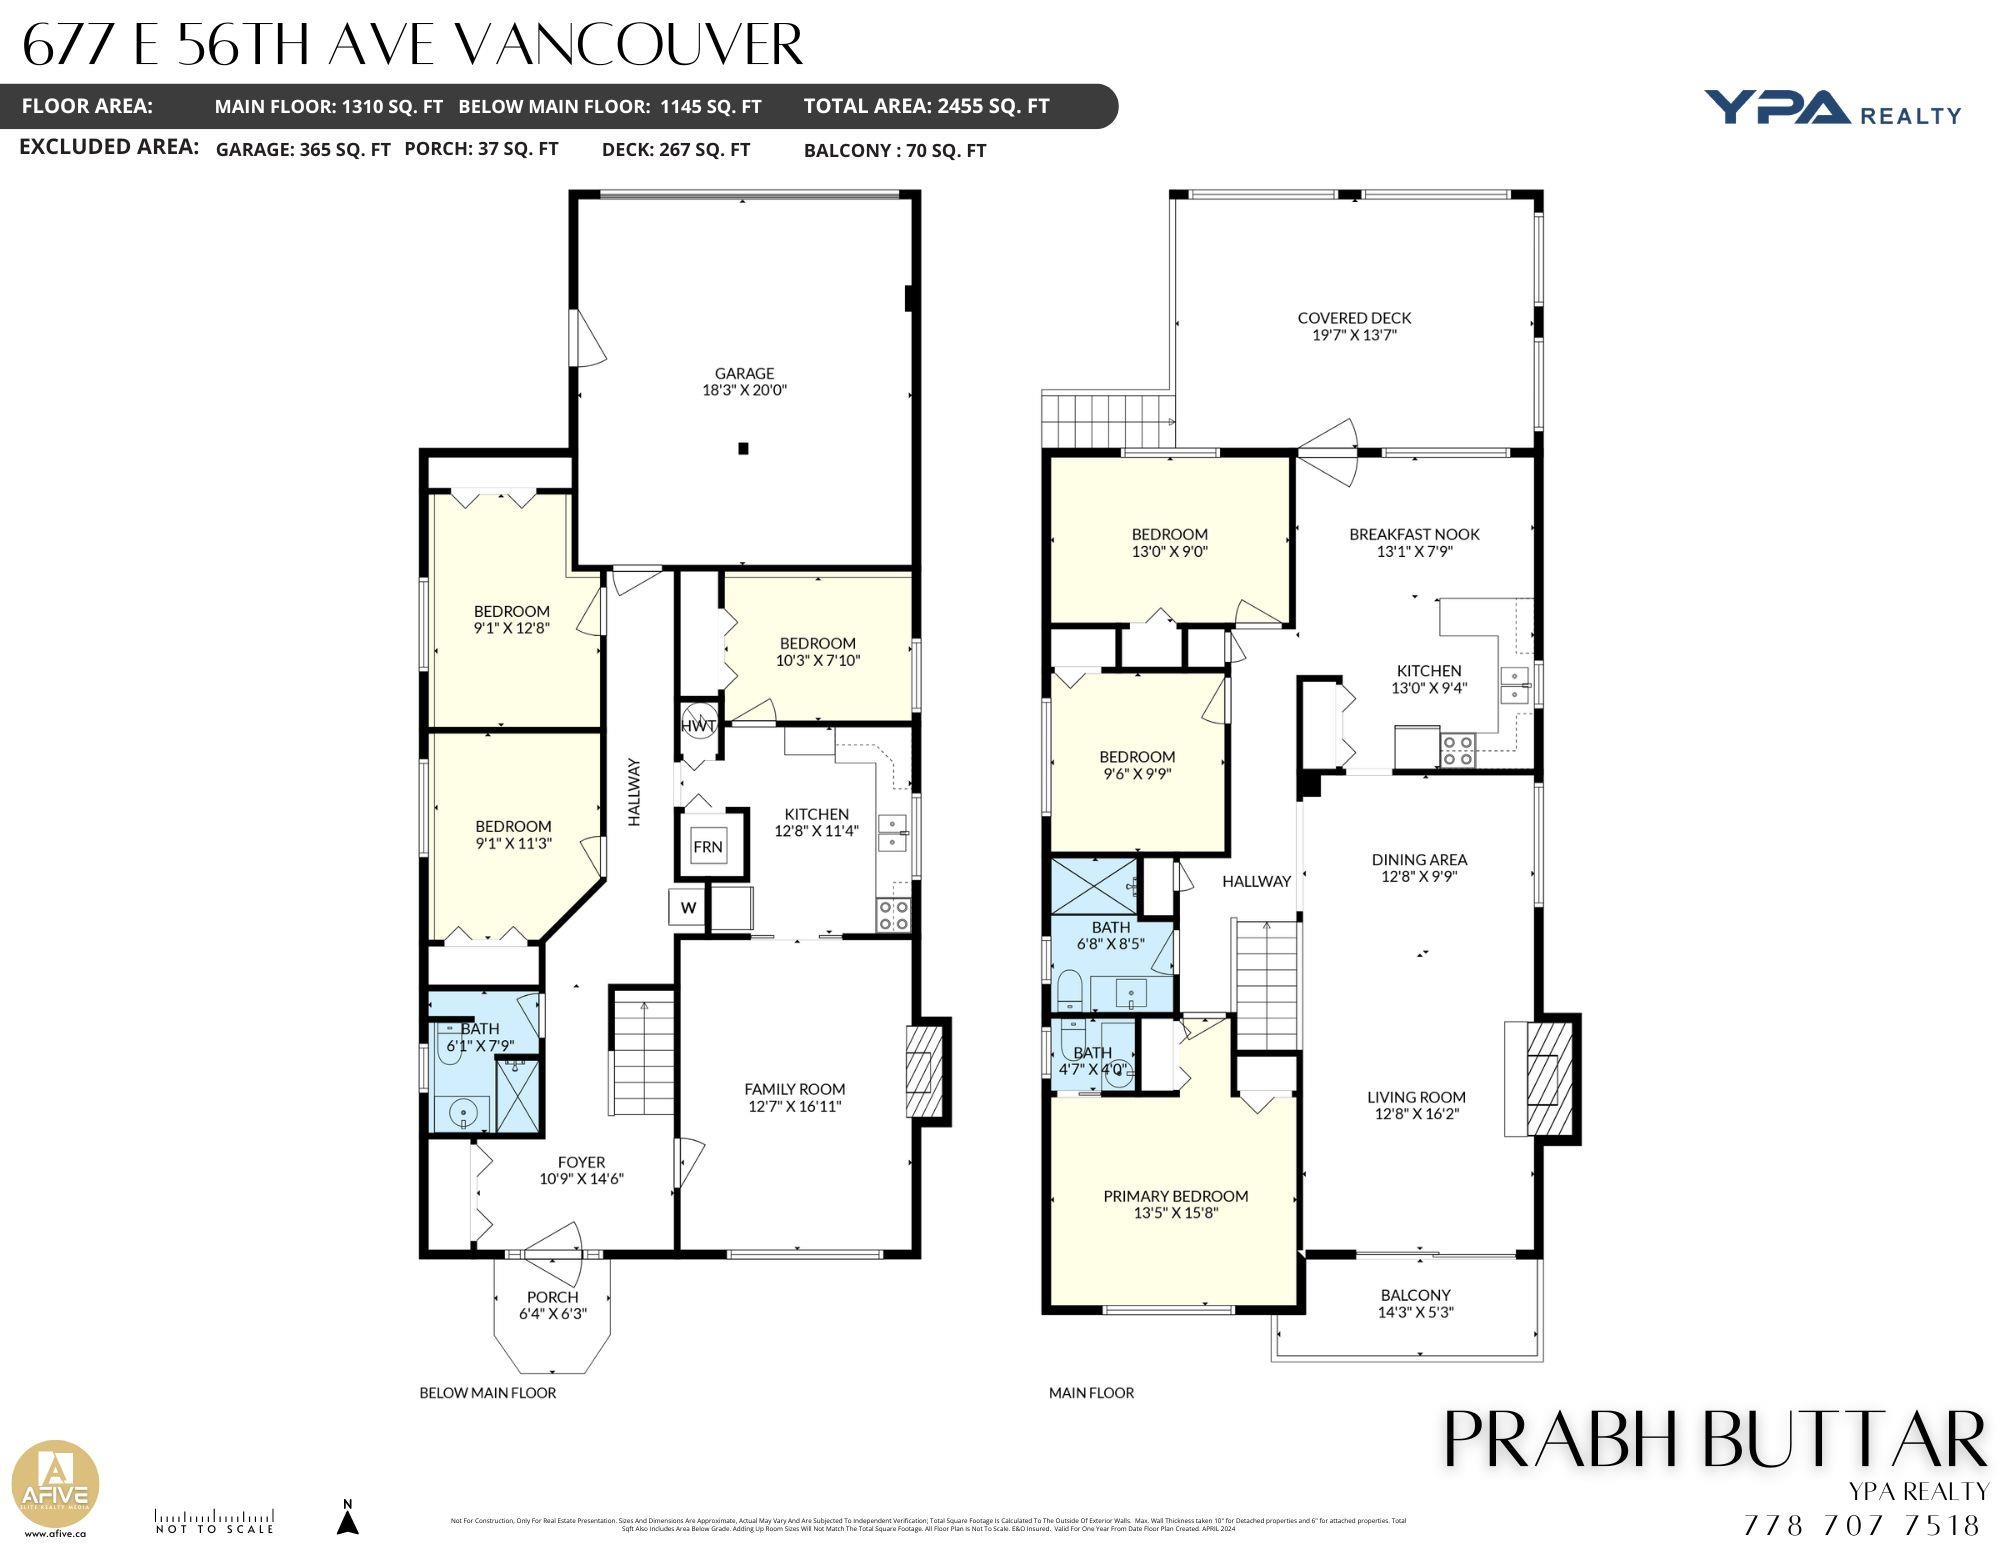 677 56TH AVENUE, Vancouver, British Columbia V5X 1R6, 6 Bedrooms Bedrooms, ,3 BathroomsBathrooms,Residential Detached,For Sale,R2878393